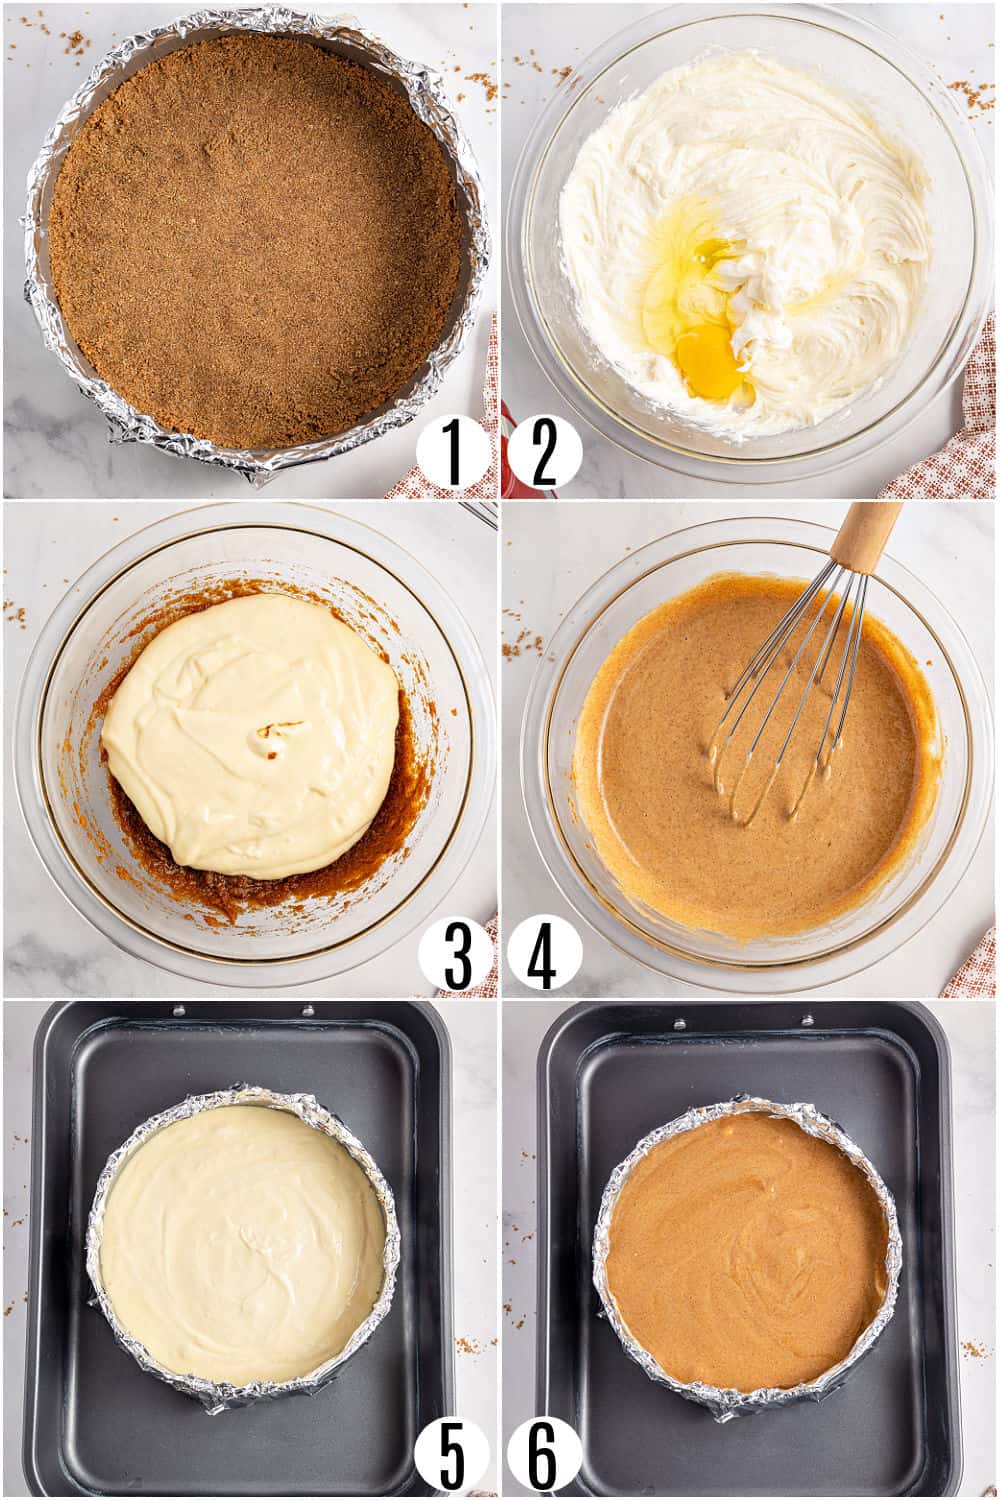 Step by step photos showing how to make pumpkin pie cheesecake.